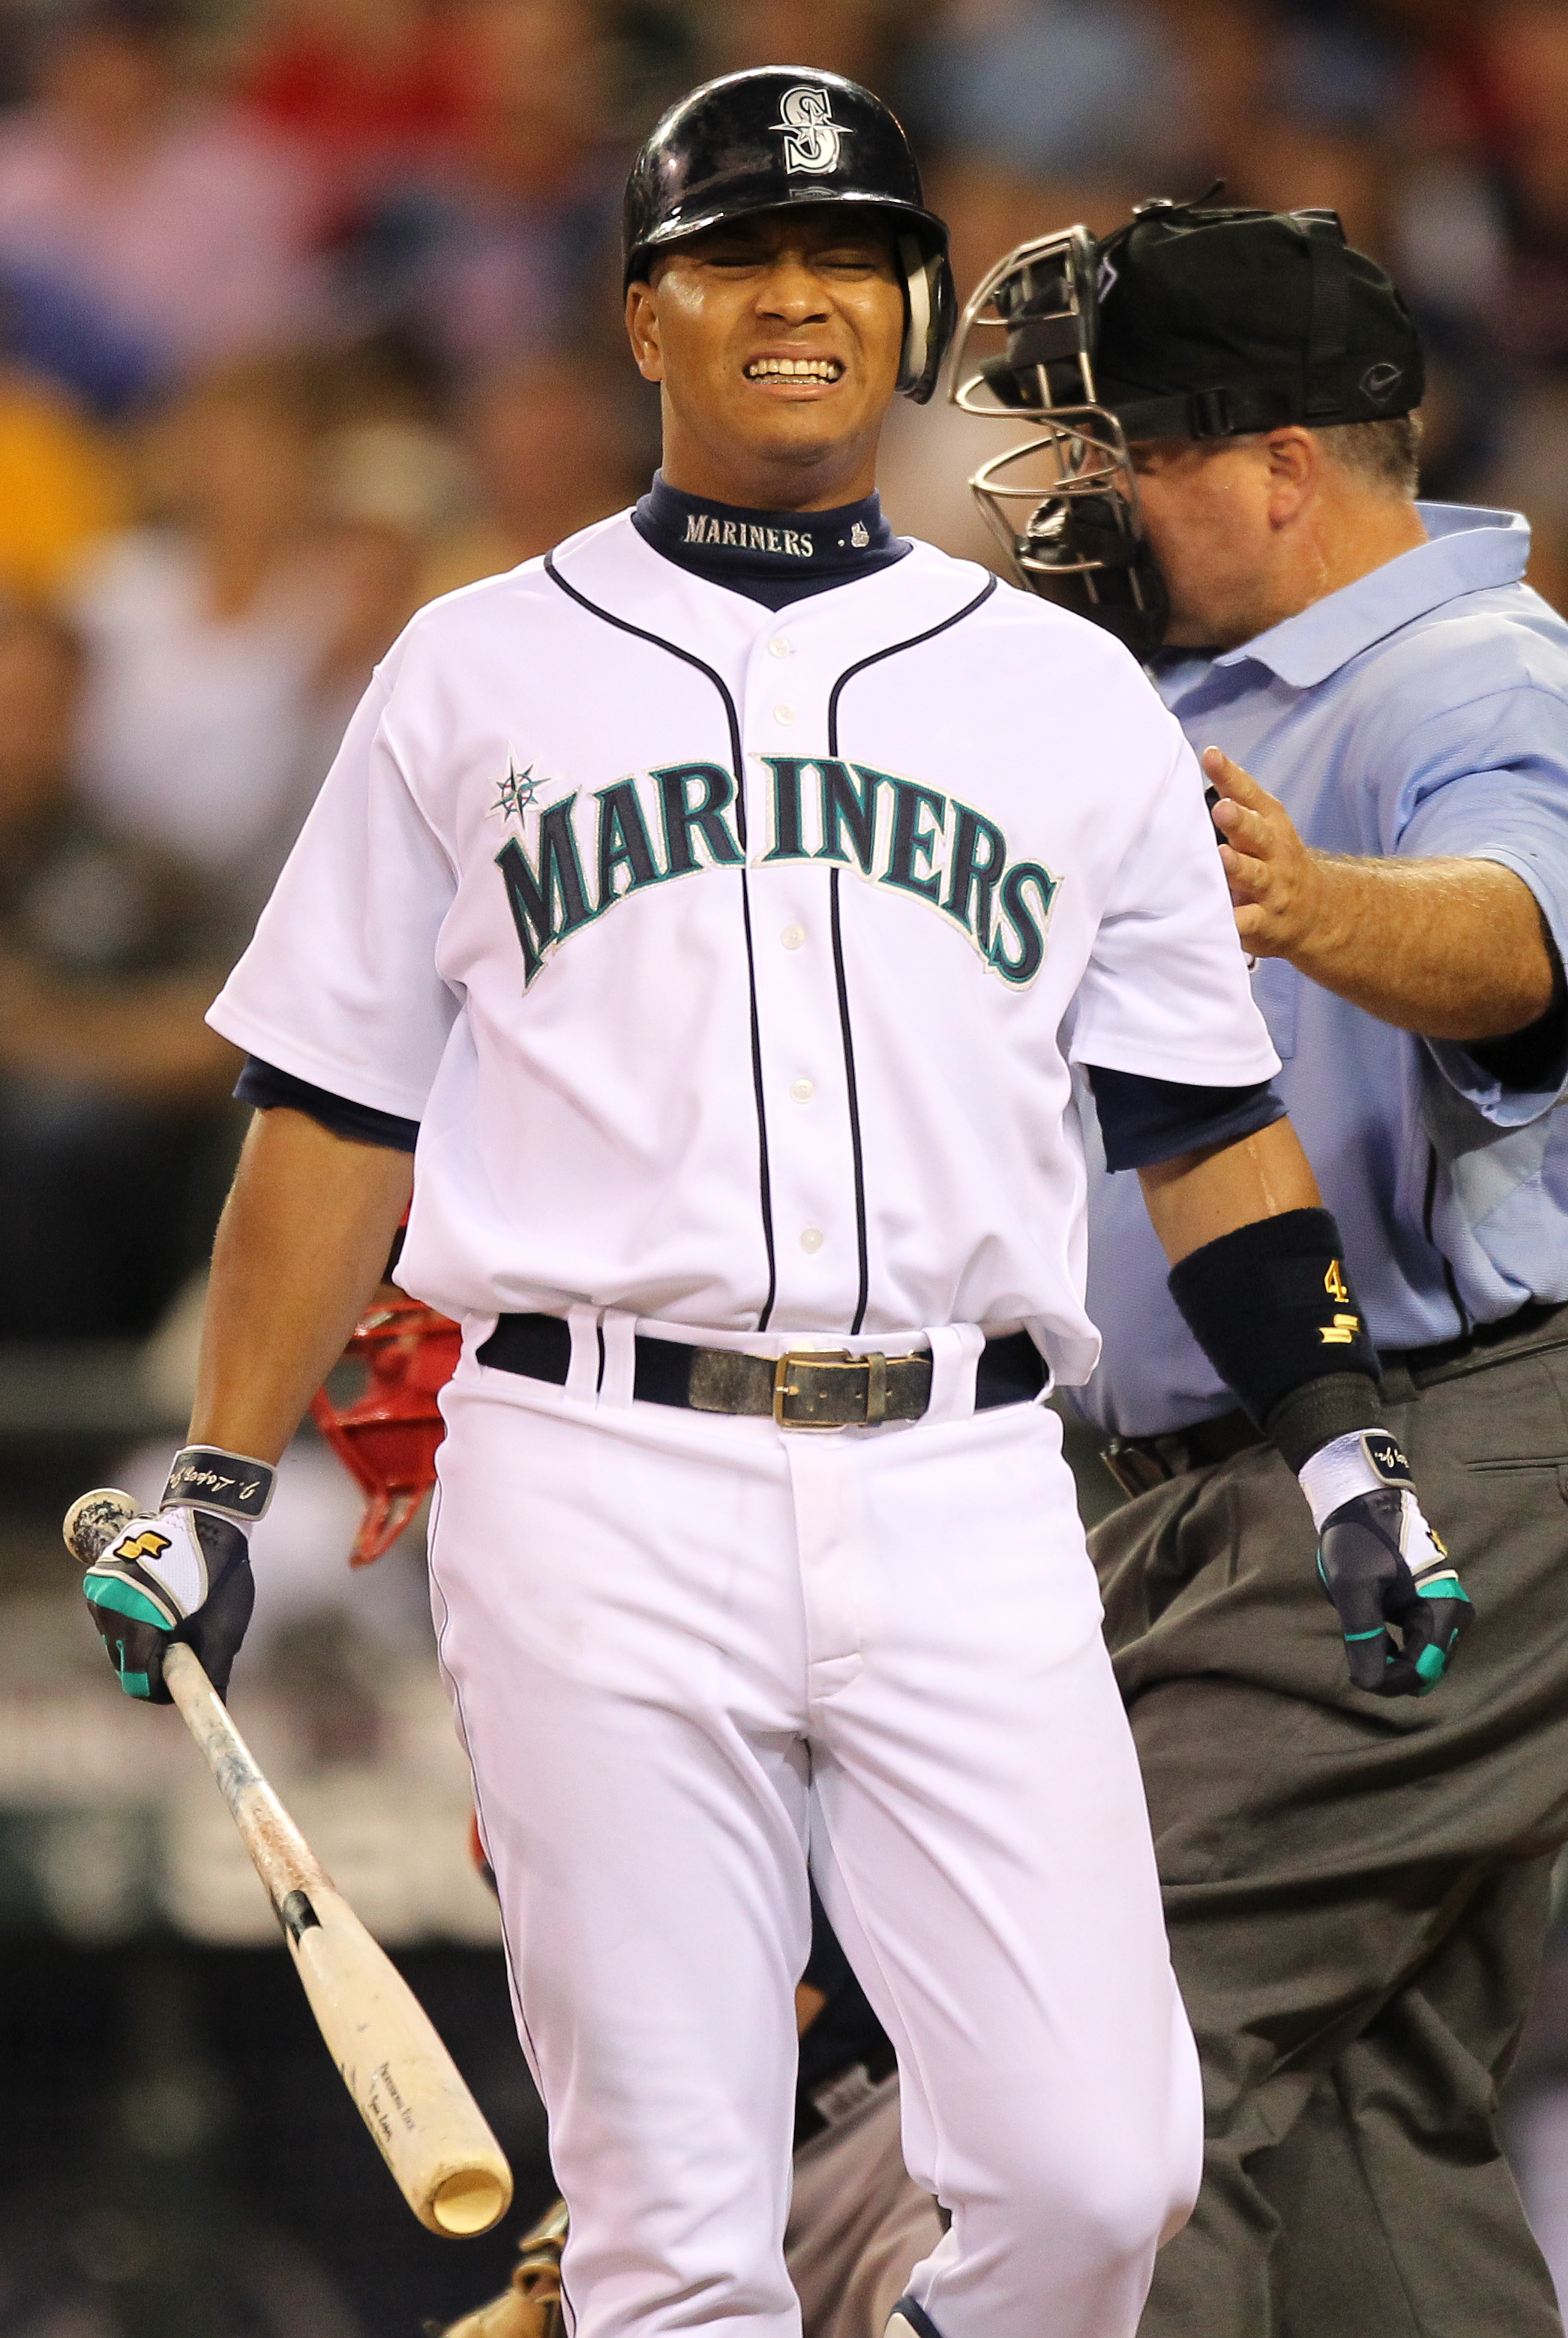 SEATTLE - JULY 24:  Jose Lopez #4 of the Seattle Mariners grimaces after being hit with a pitch against the Boston Red Sox at Safeco Field on July 24, 2010 in Seattle, Washington. (Photo by Otto Greule Jr/Getty Images)